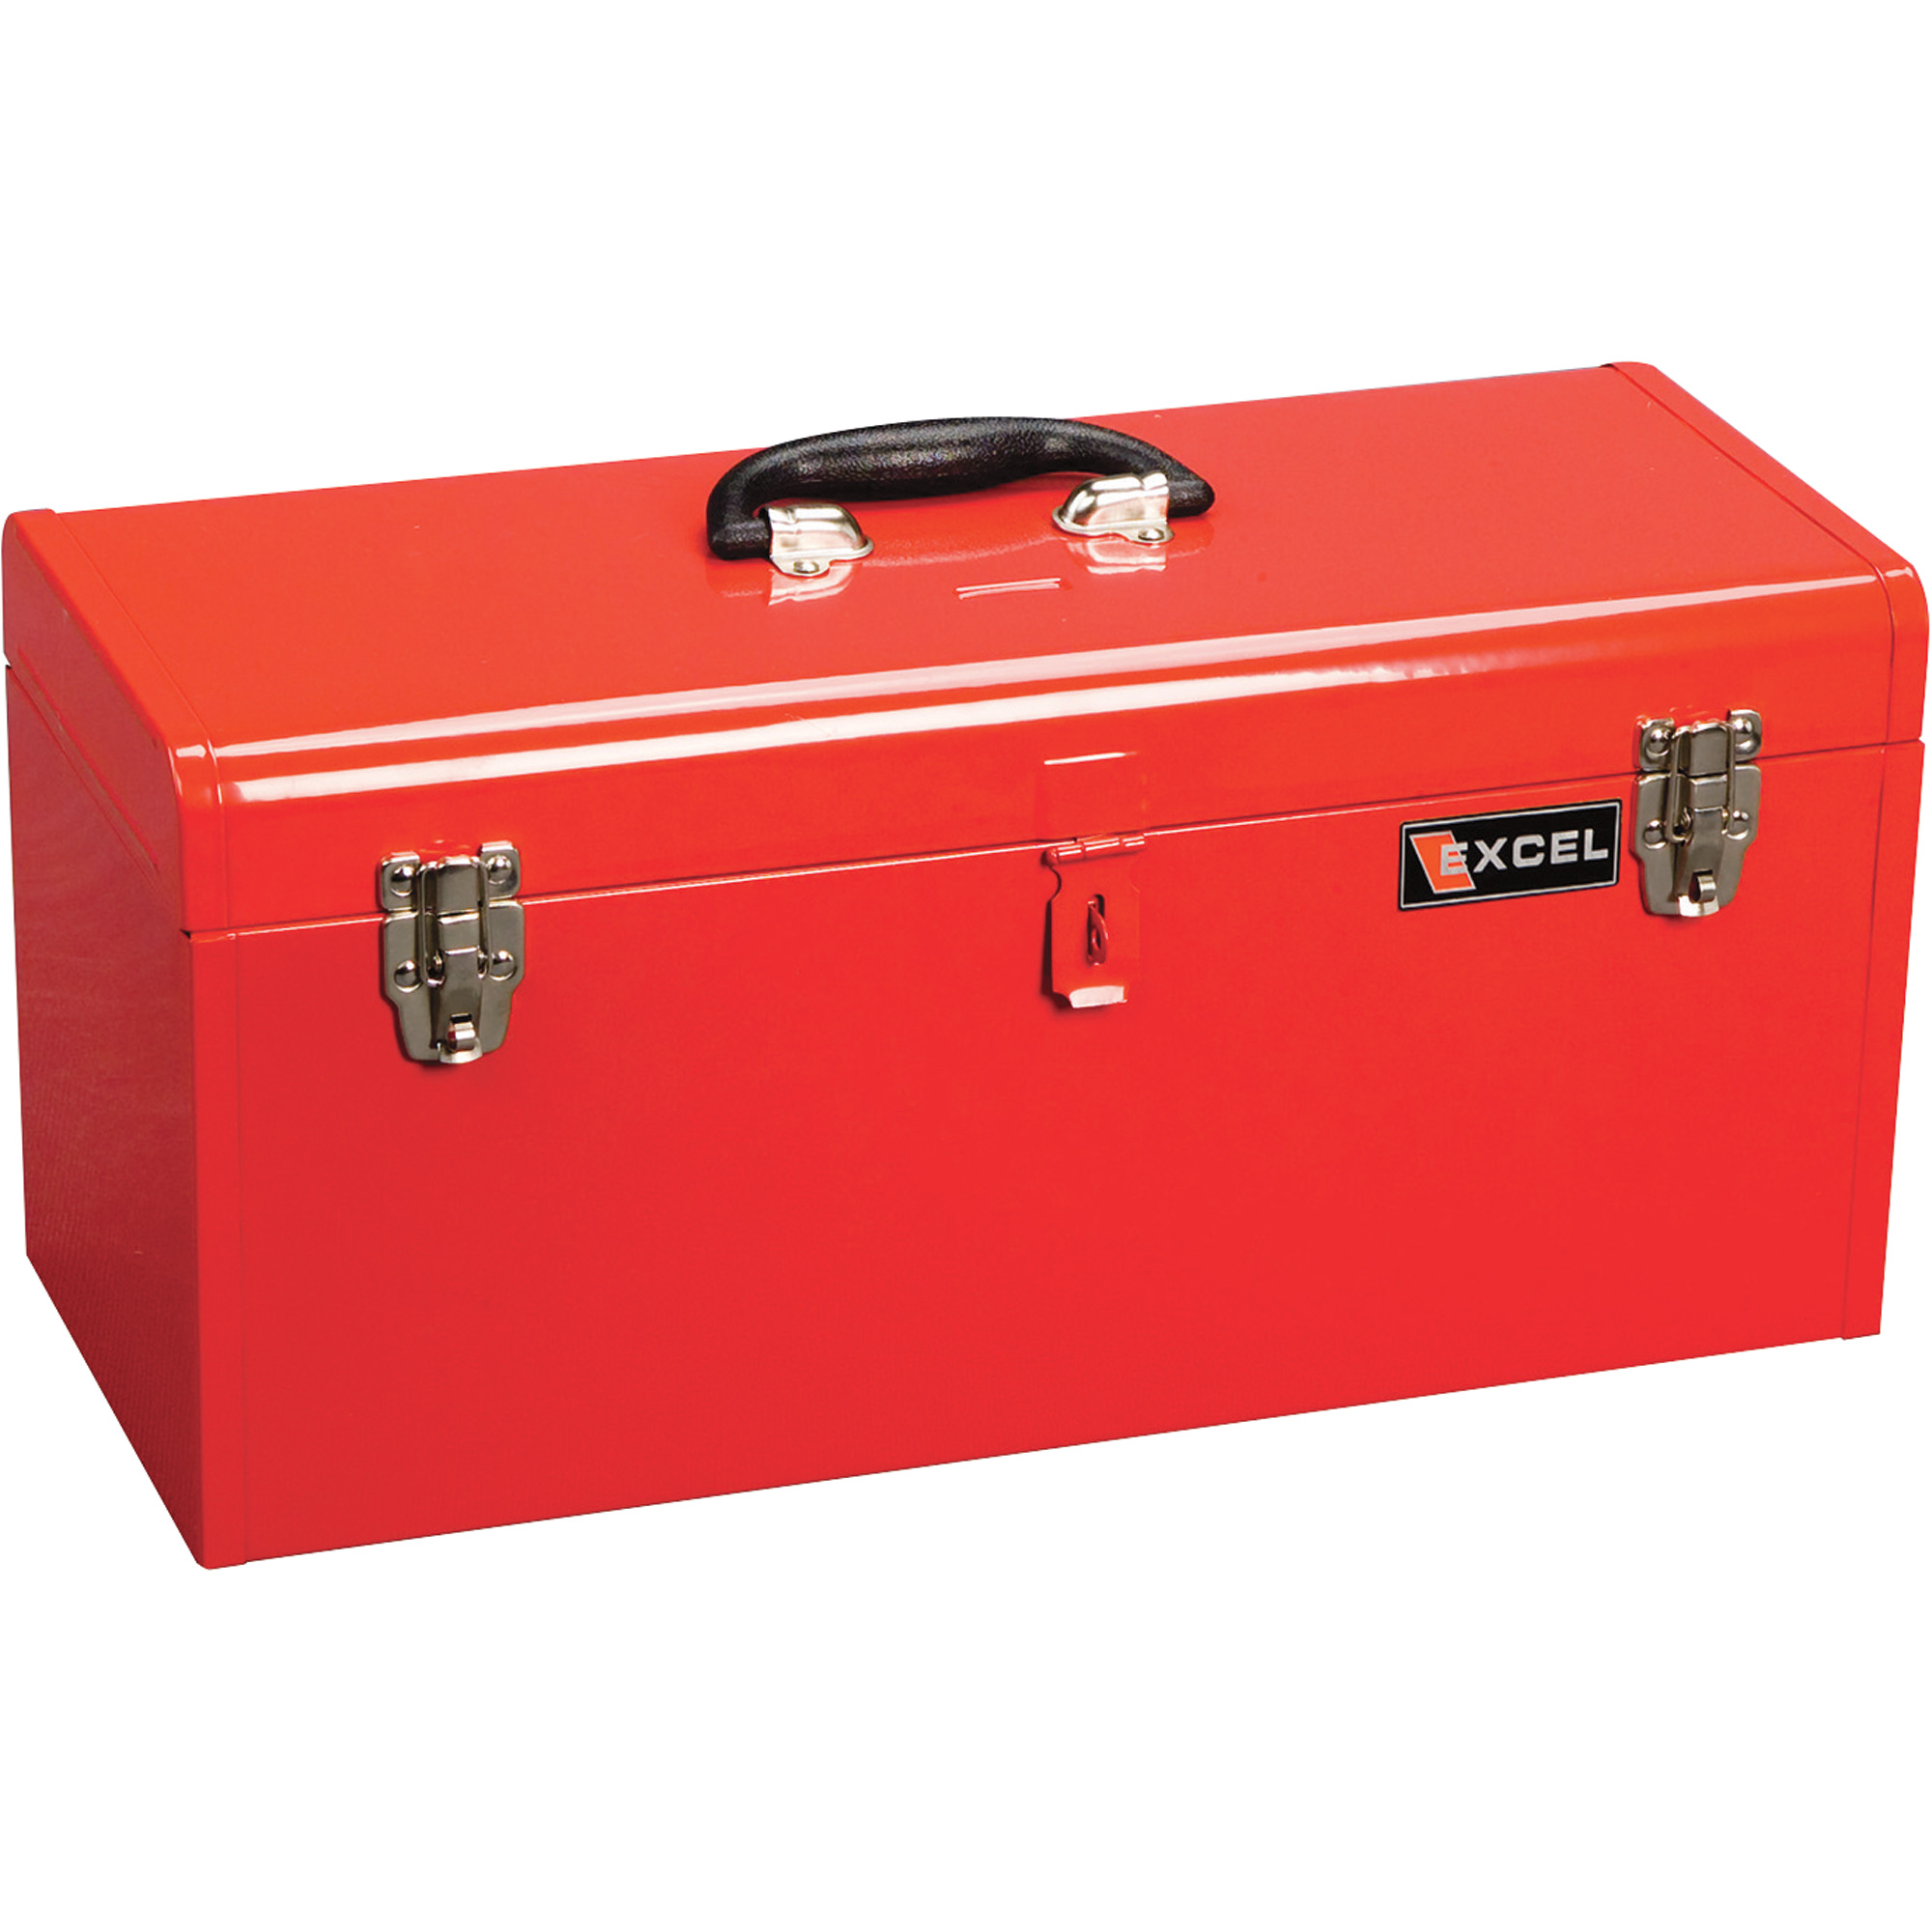 Excel Portable Toolbox With Tray Model  Tb140 Red   Tool Boxes    